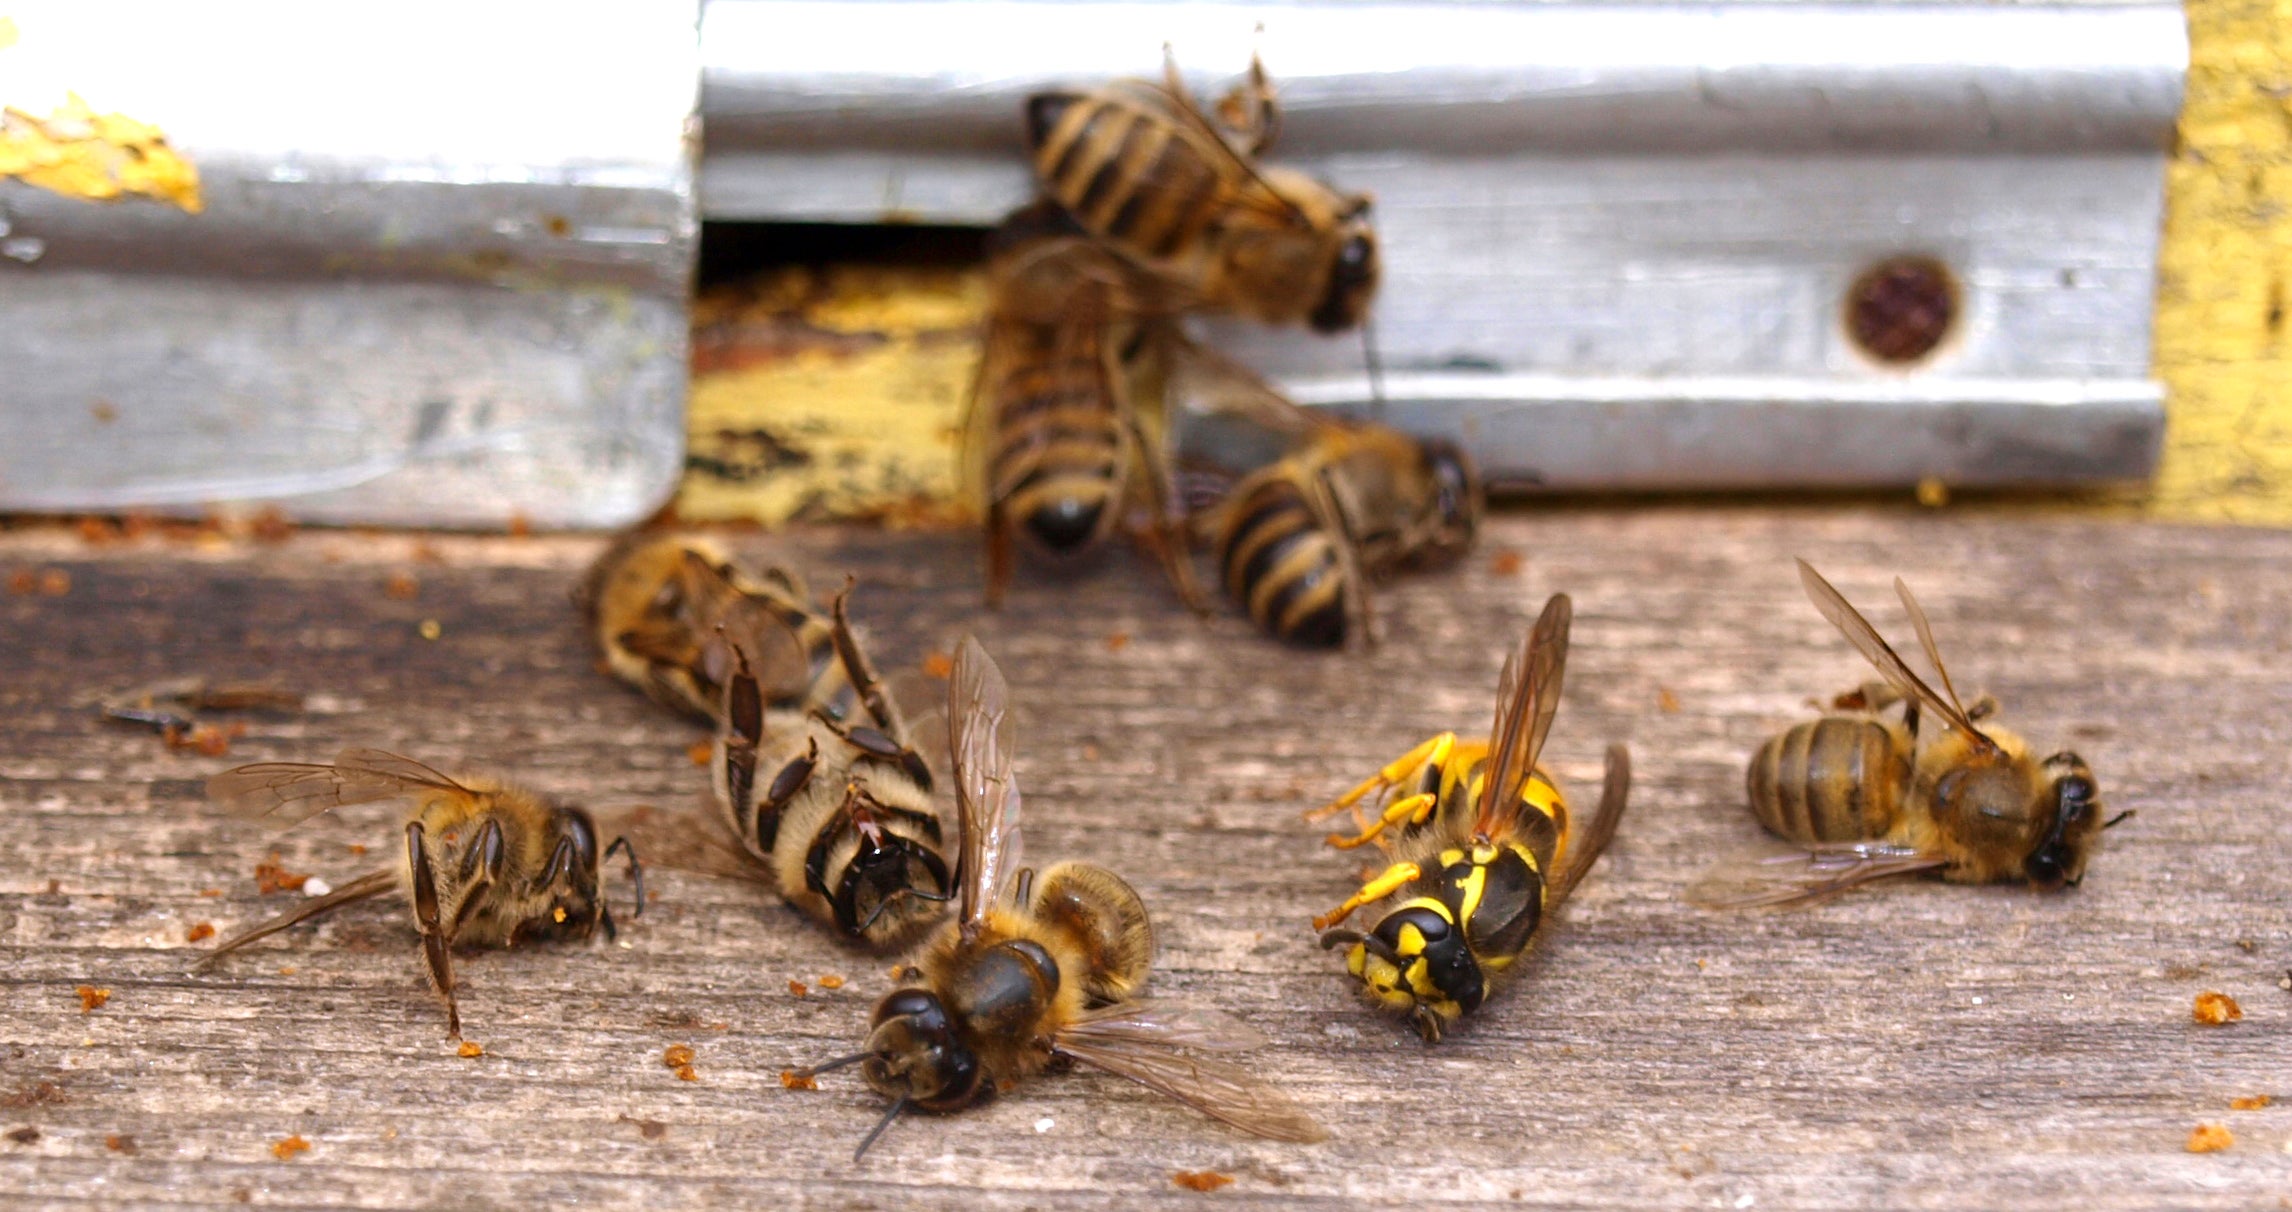 The Genetics Behind Bees’ Black and Yellow Butts